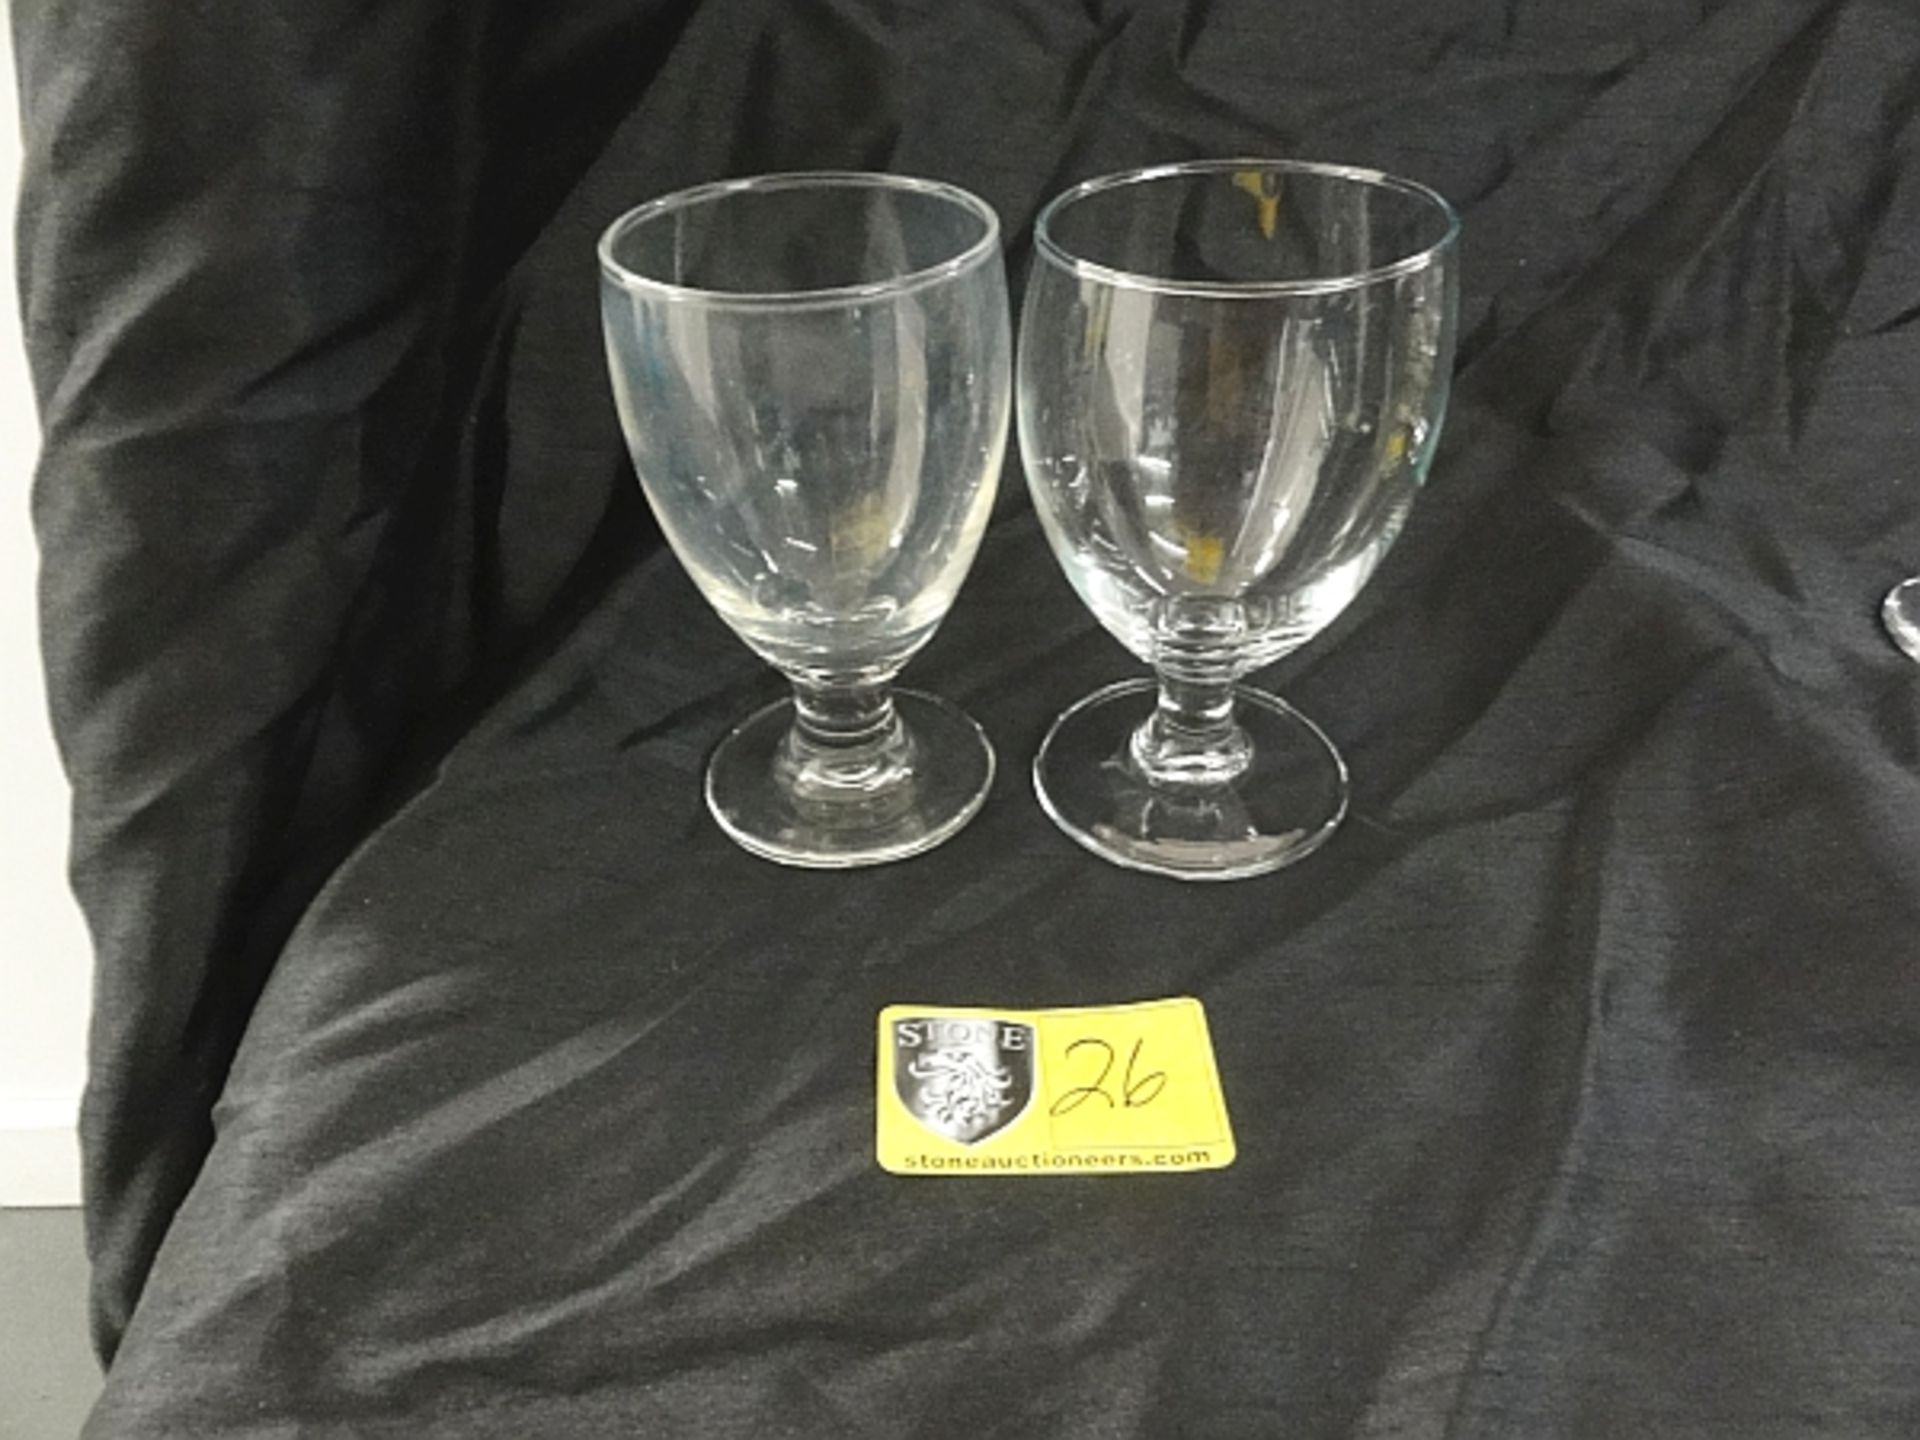 LOT OF 224 STEM GLASS- LOT COMES IN 9 CRATES BILLED @ $15 EA